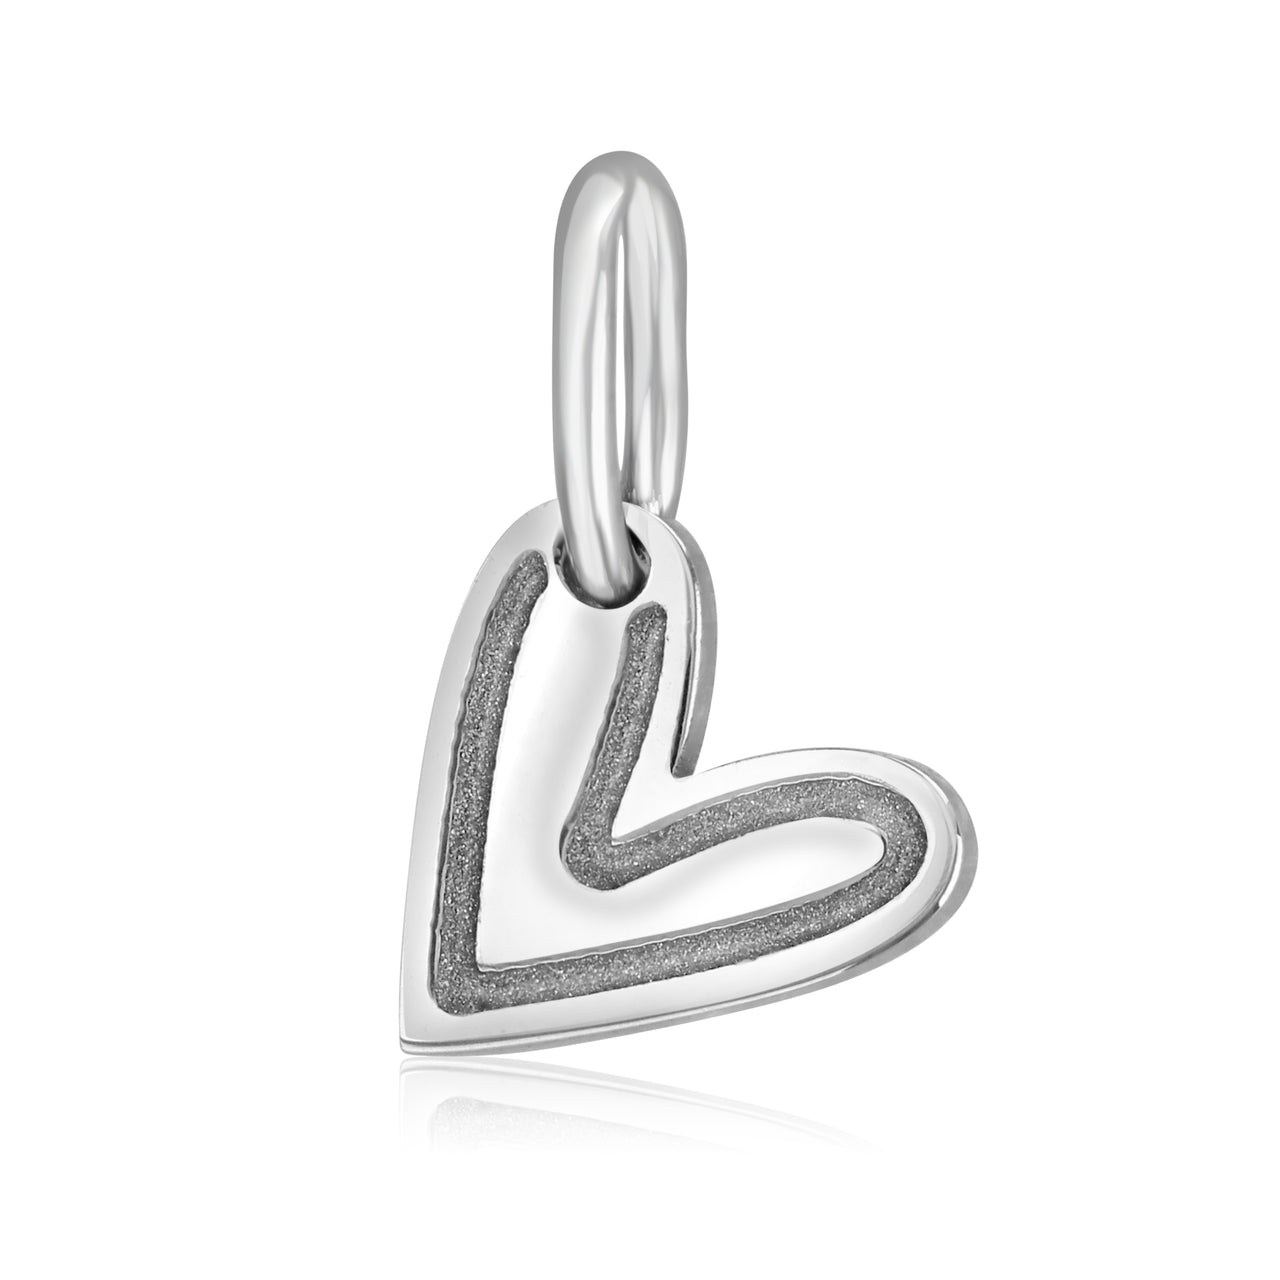 Silver heart charm with sparkly enamel